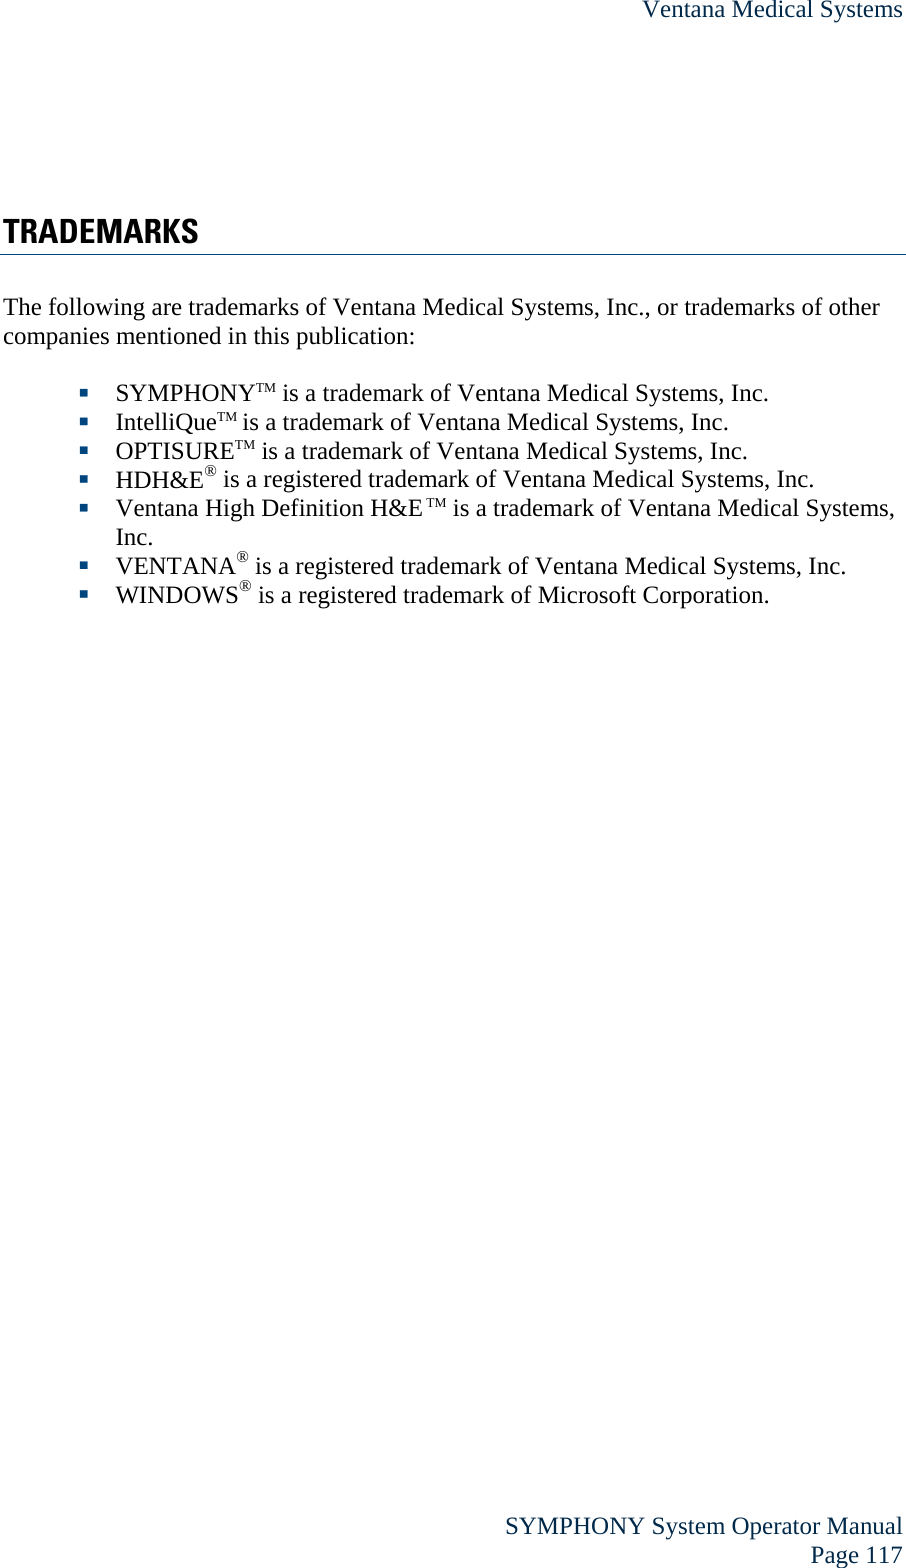 Ventana Medical Systems  SYMPHONY System Operator Manual Page 117  TRADEMARKS The following are trademarks of Ventana Medical Systems, Inc., or trademarks of other companies mentioned in this publication:   SYMPHONYTM is a trademark of Ventana Medical Systems, Inc.  IntelliQueTM is a trademark of Ventana Medical Systems, Inc.  OPTISURETM is a trademark of Ventana Medical Systems, Inc.  HDH&amp;E® is a registered trademark of Ventana Medical Systems, Inc.   Ventana High Definition H&amp;E TM is a trademark of Ventana Medical Systems, Inc.   VENTANA® is a registered trademark of Ventana Medical Systems, Inc.  WINDOWS® is a registered trademark of Microsoft Corporation. 